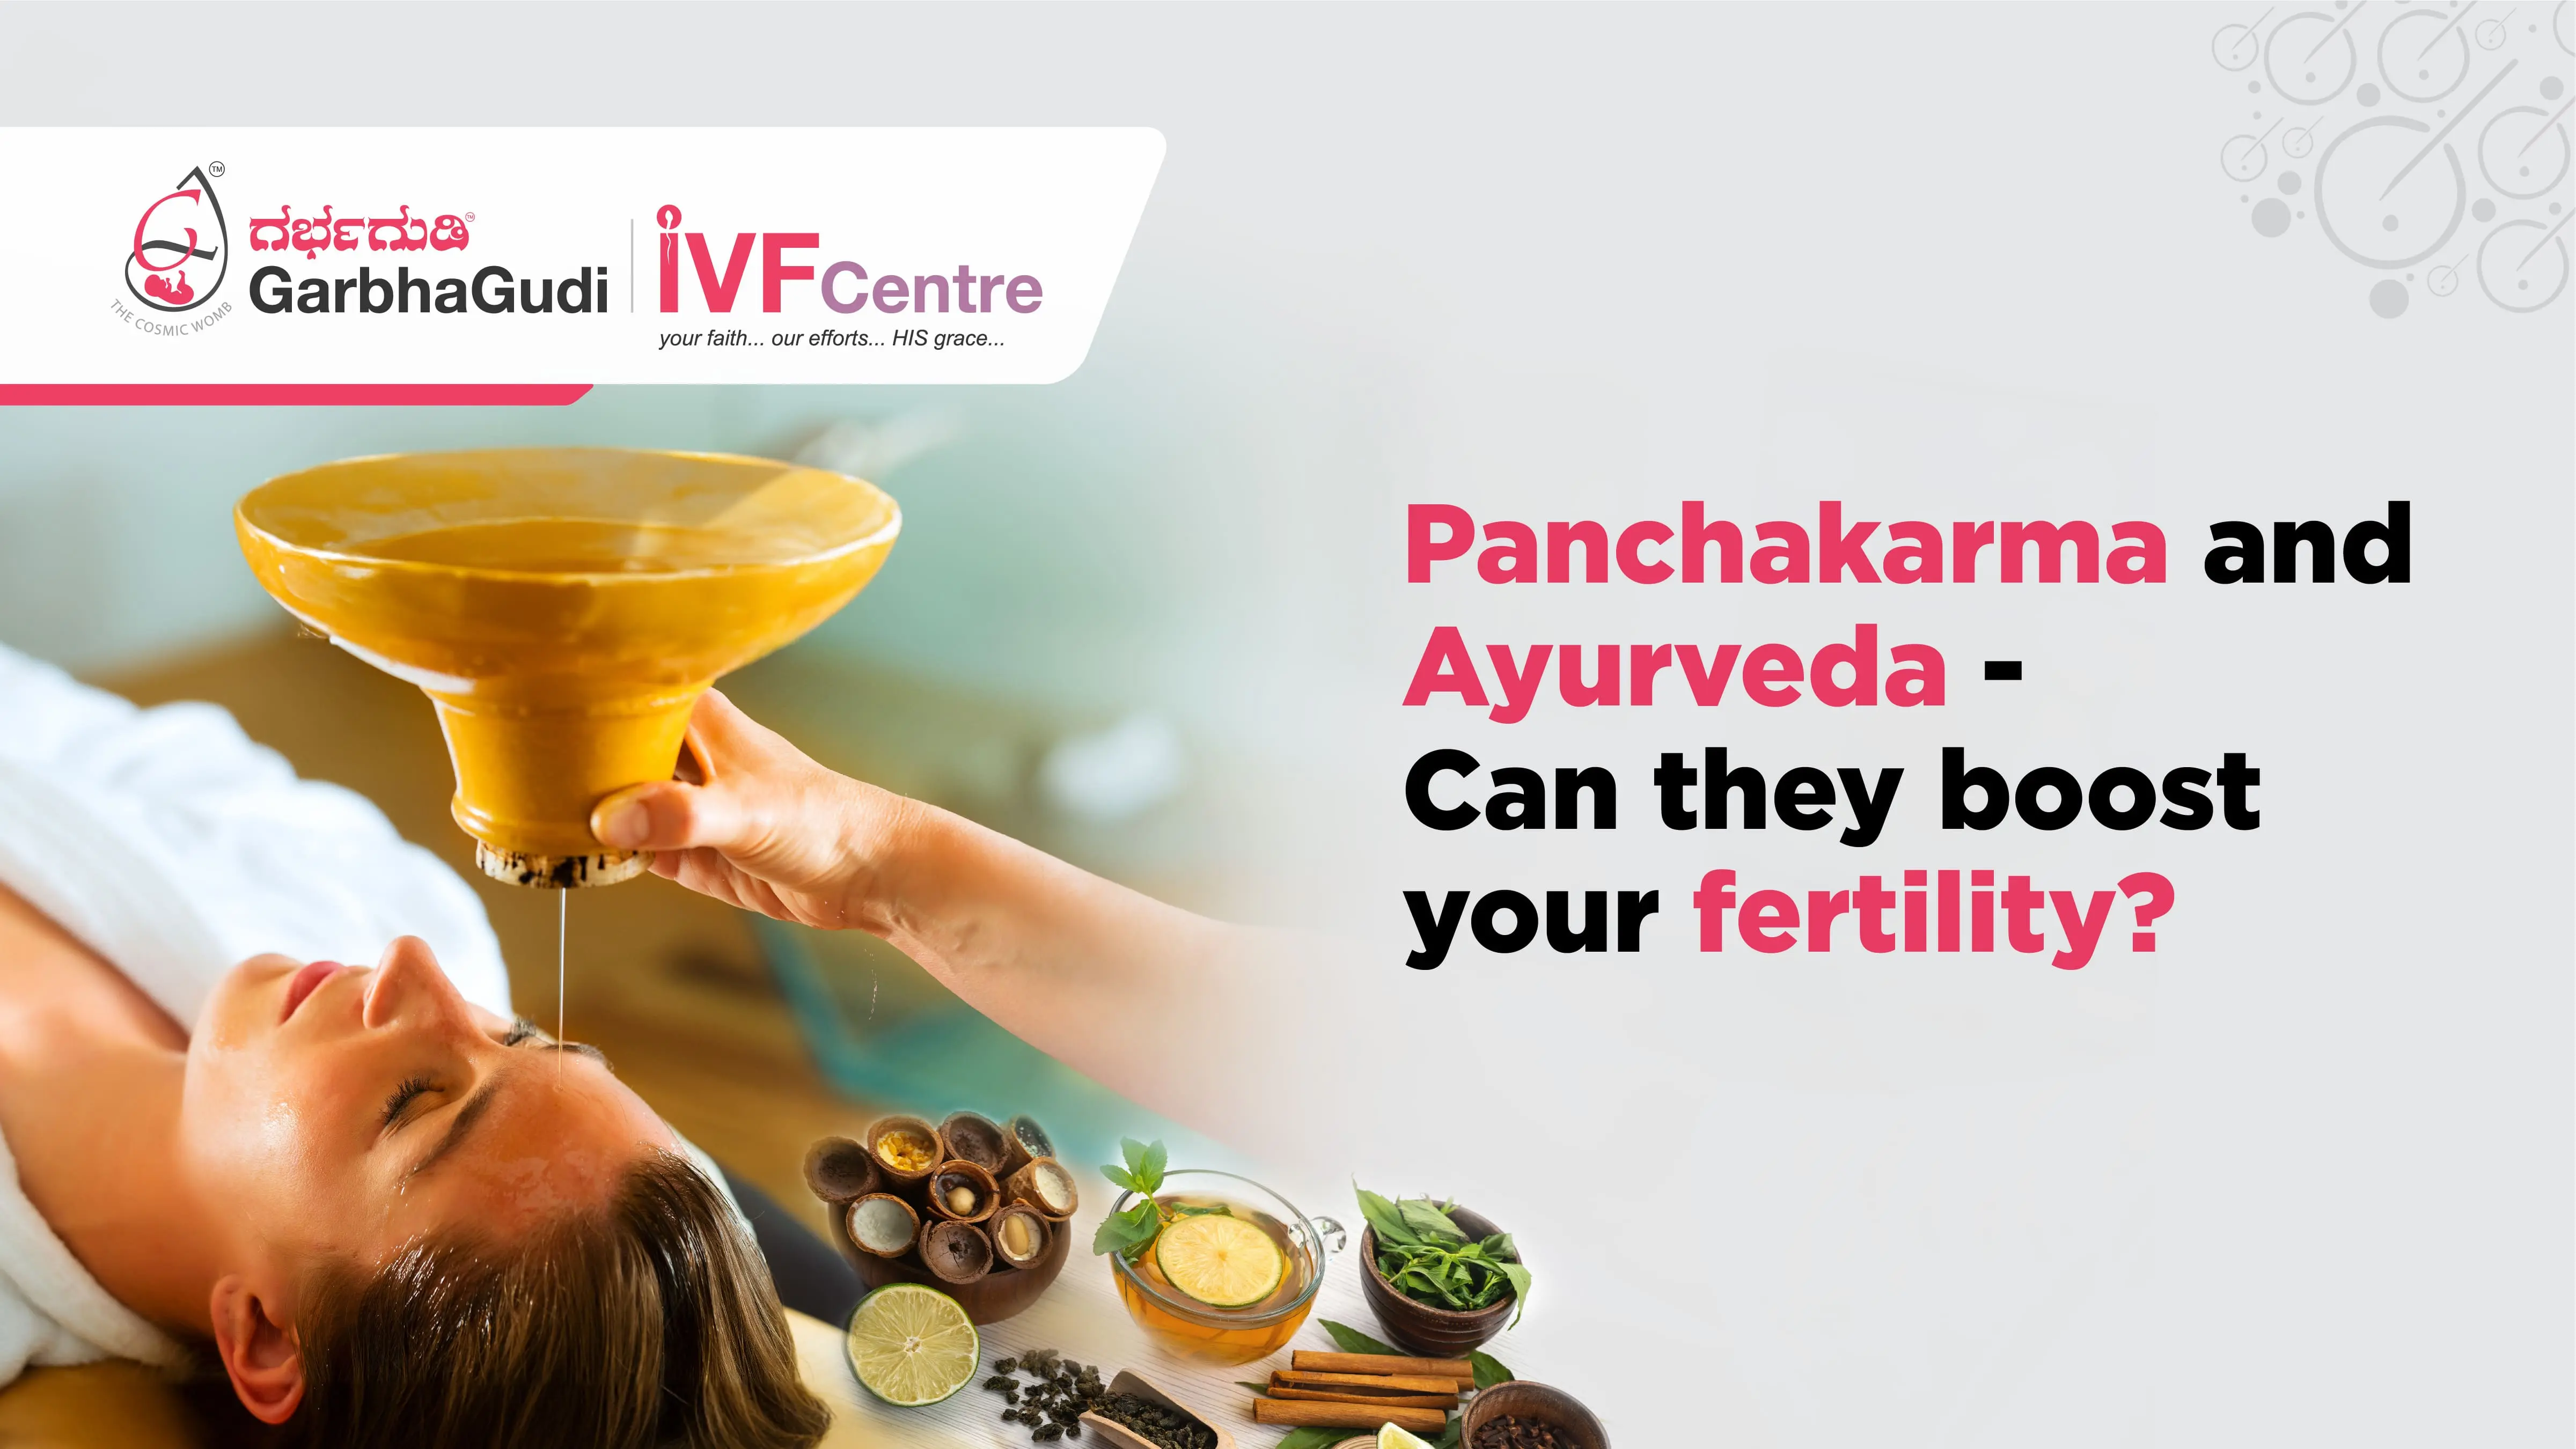 Panchakarma and Ayurveda - Can they boost your fertility?